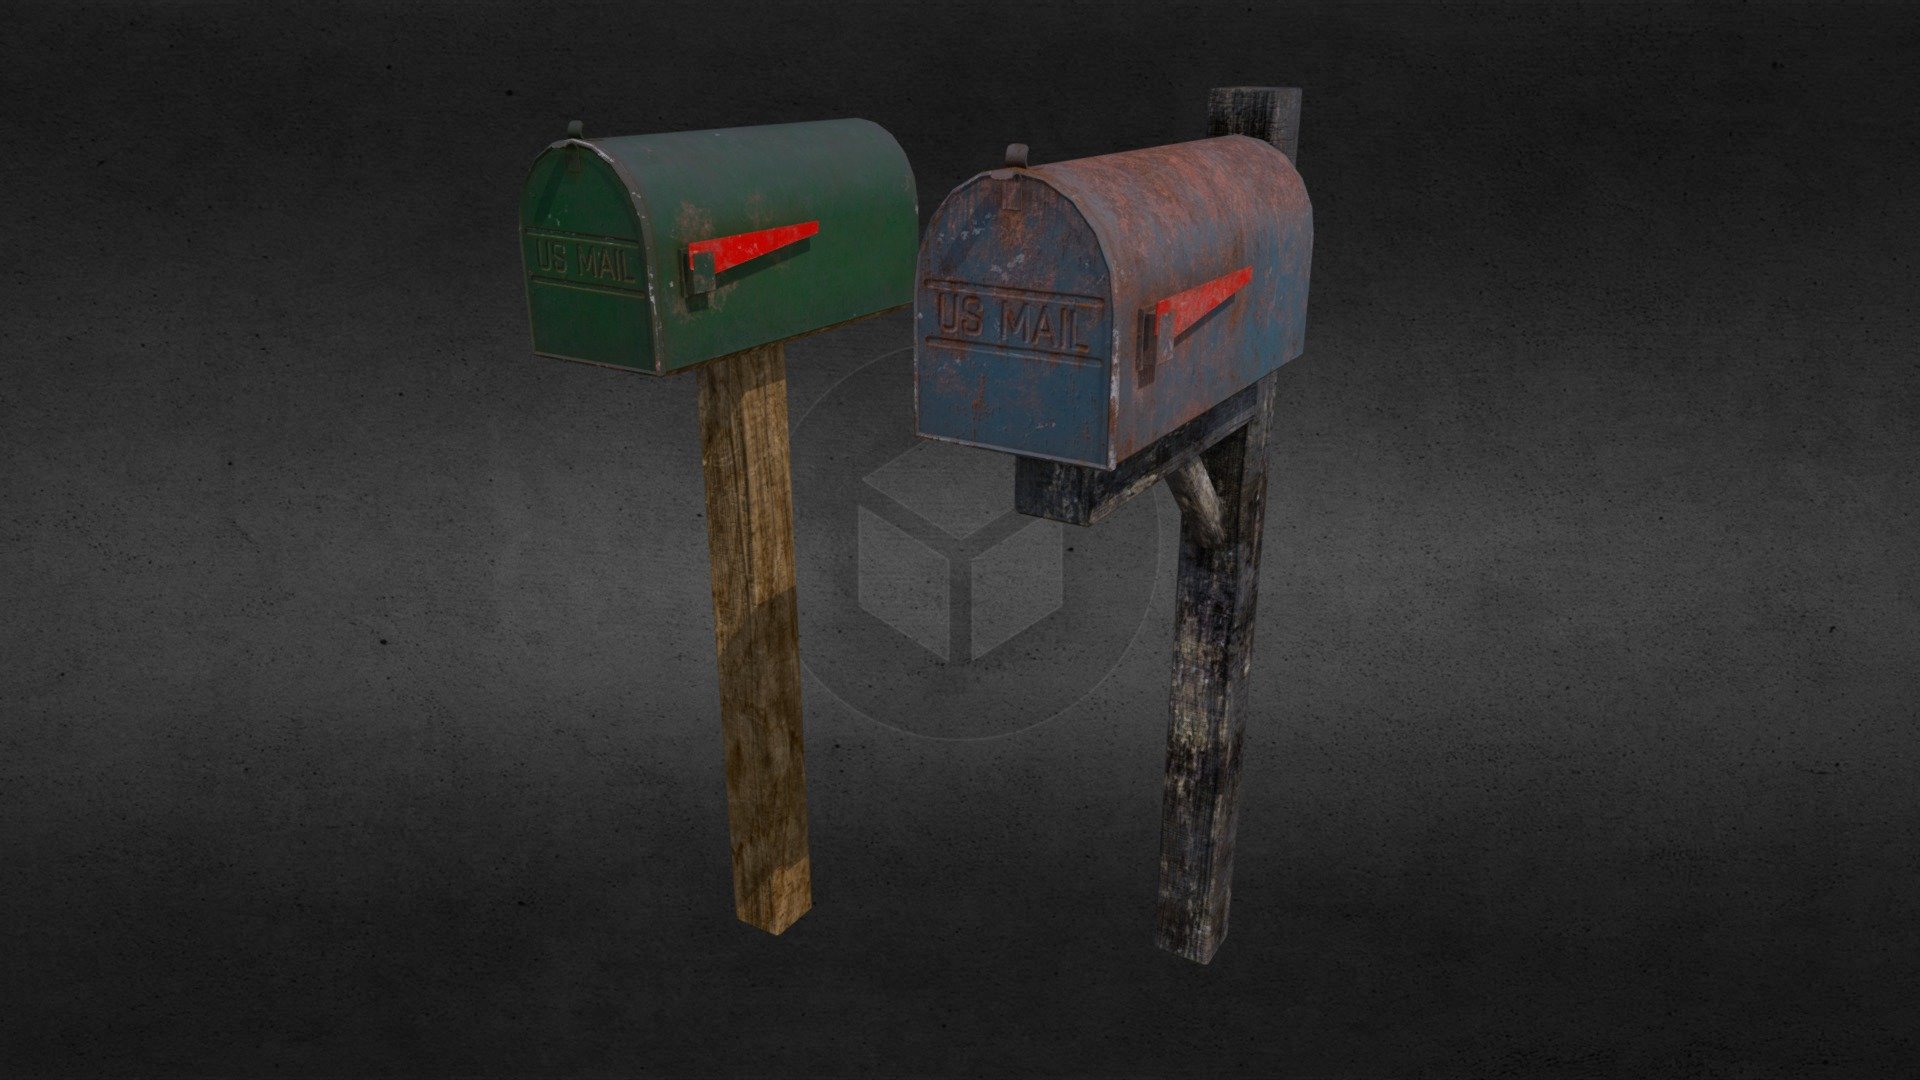 Created some Varying ages of mailboxes. One with some light wear and tear while the other has seen better days 3d model